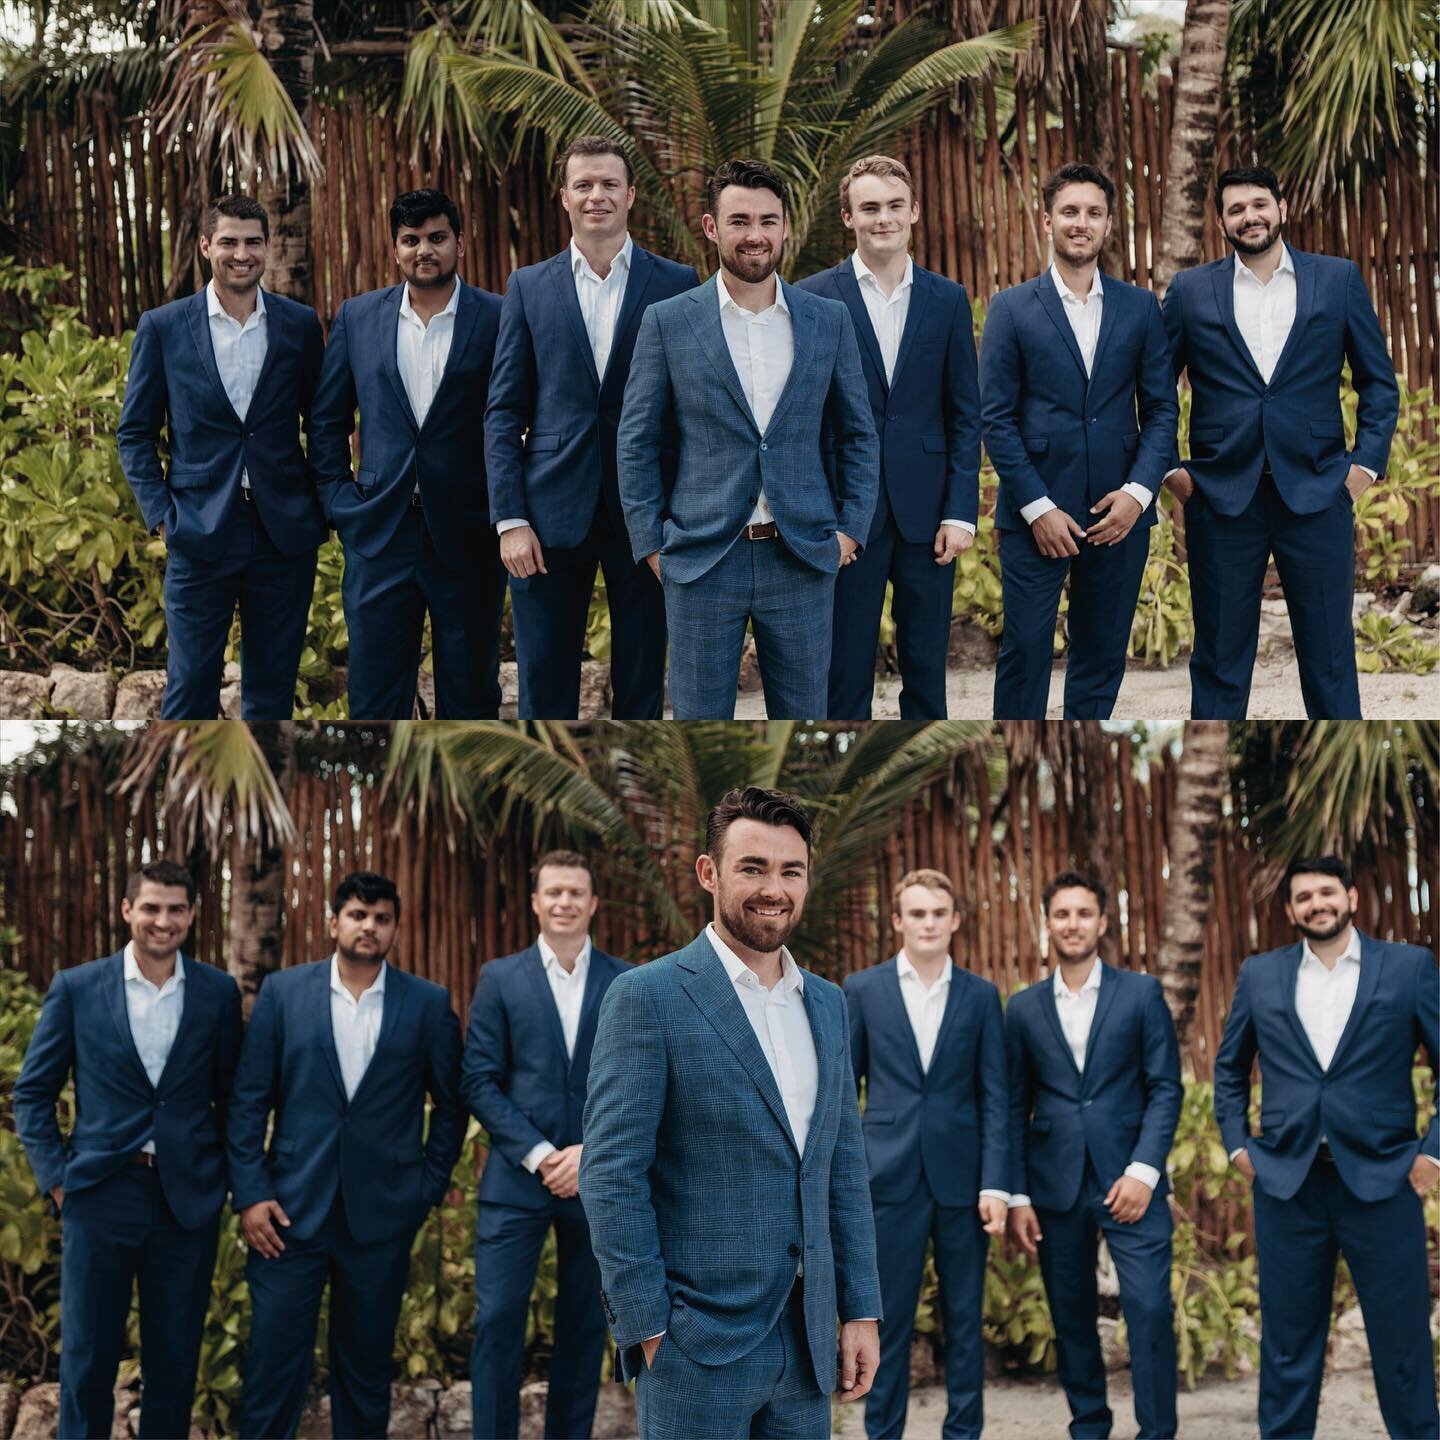 How to get through the most important day without the squad of great moments?
 Thank you for being there!
.
.
.
.
Working with @maricarmenarcosphoto 
.
.
#wedding #weddingtabledecor #weddingphotography #tulumwedding #groom #groomsmen #weddingphotogra